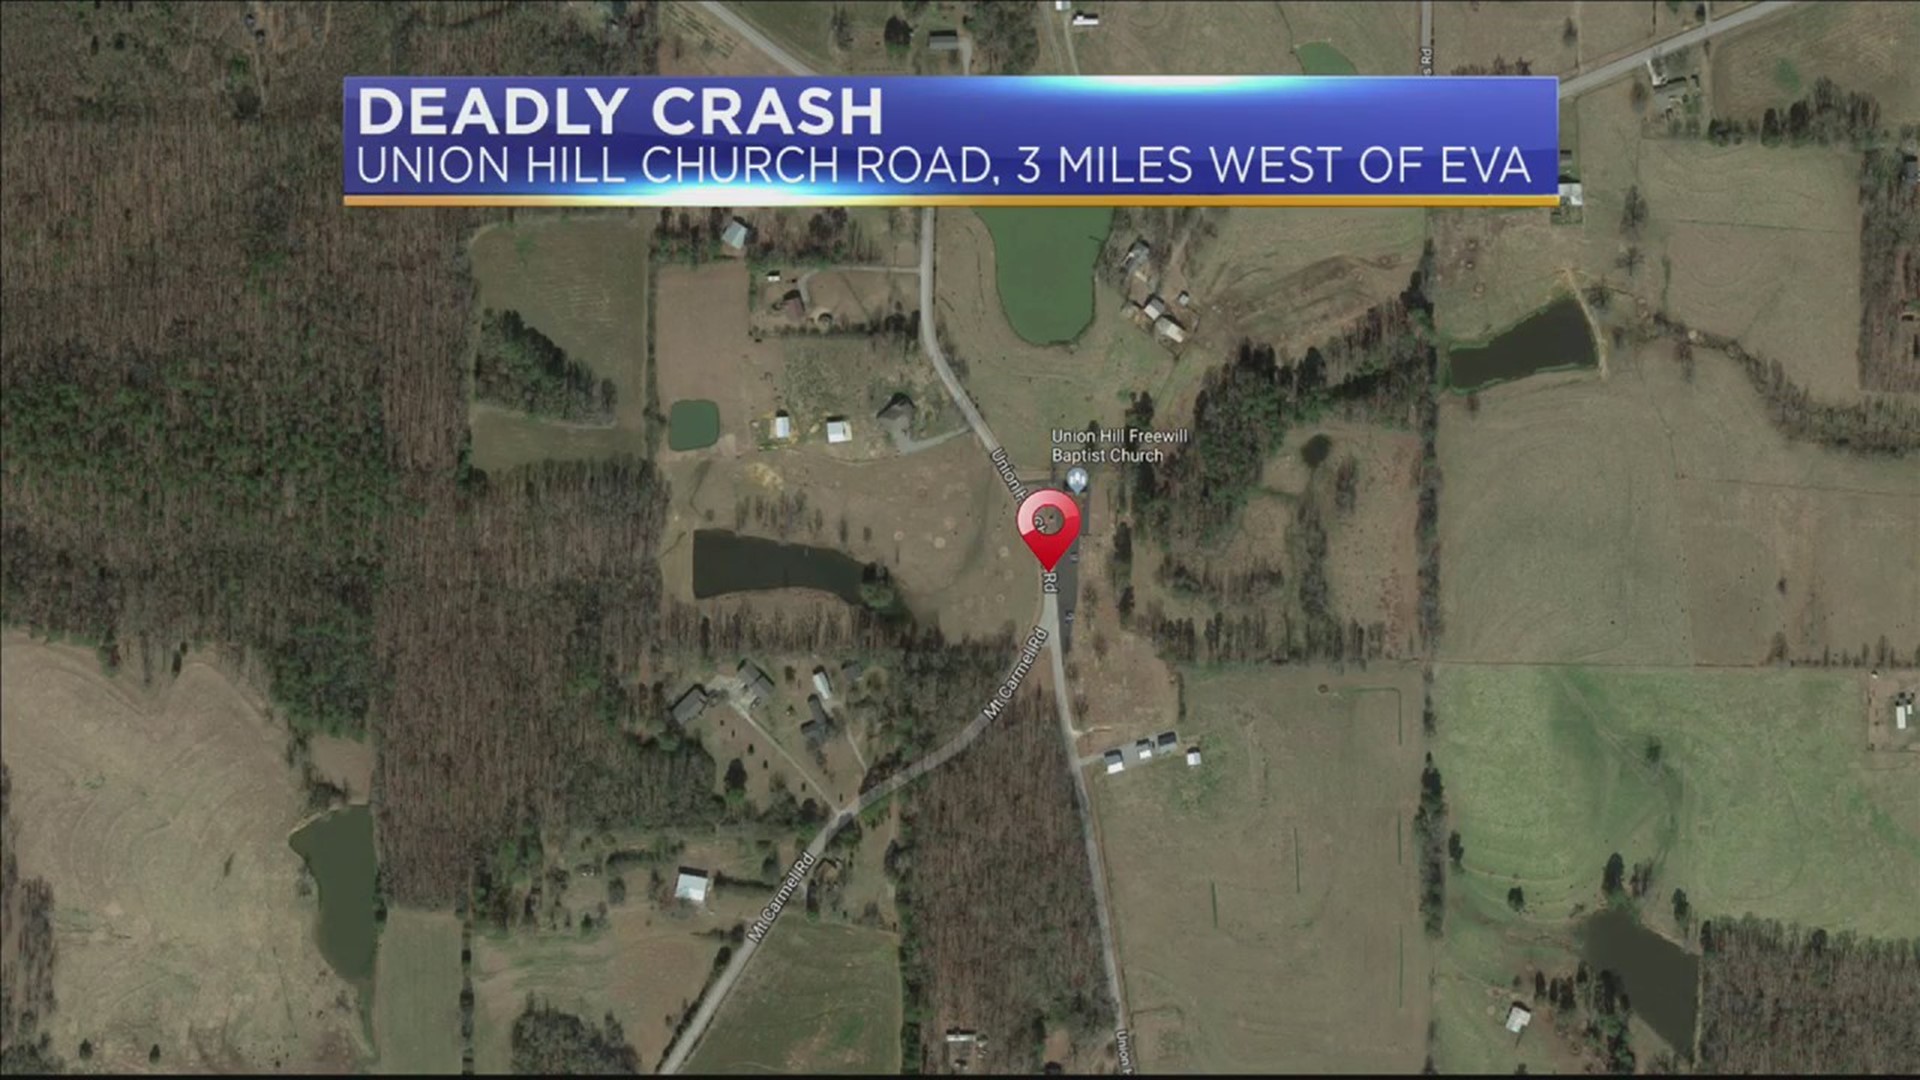 Authorities are investigating a a deadly crash that happened in Morgan County Sunday evening, three miles west of Eva.